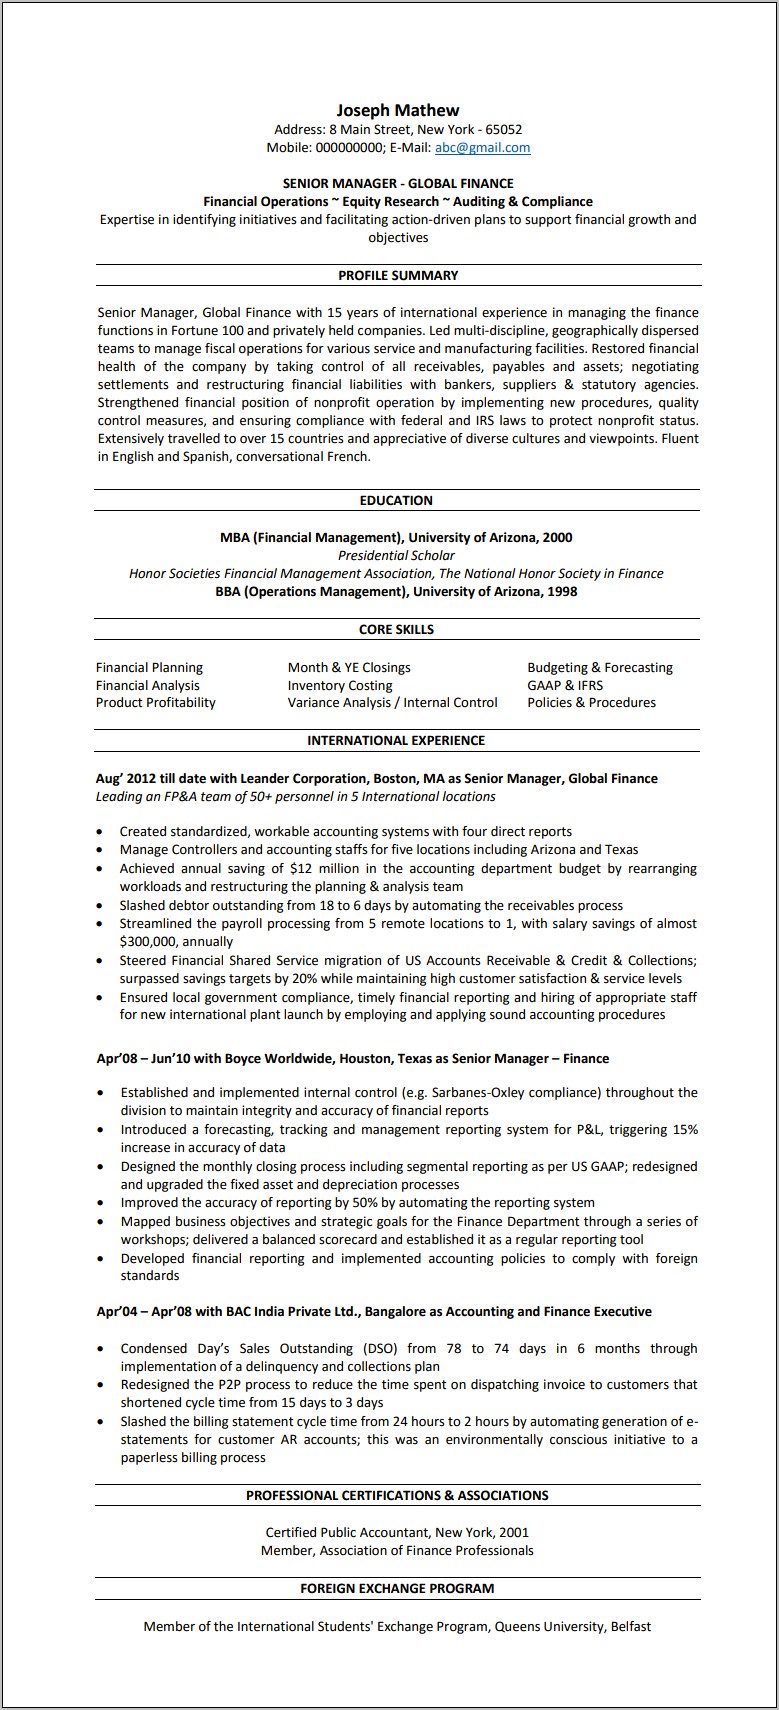 Best Resume Format For Gulf Countries